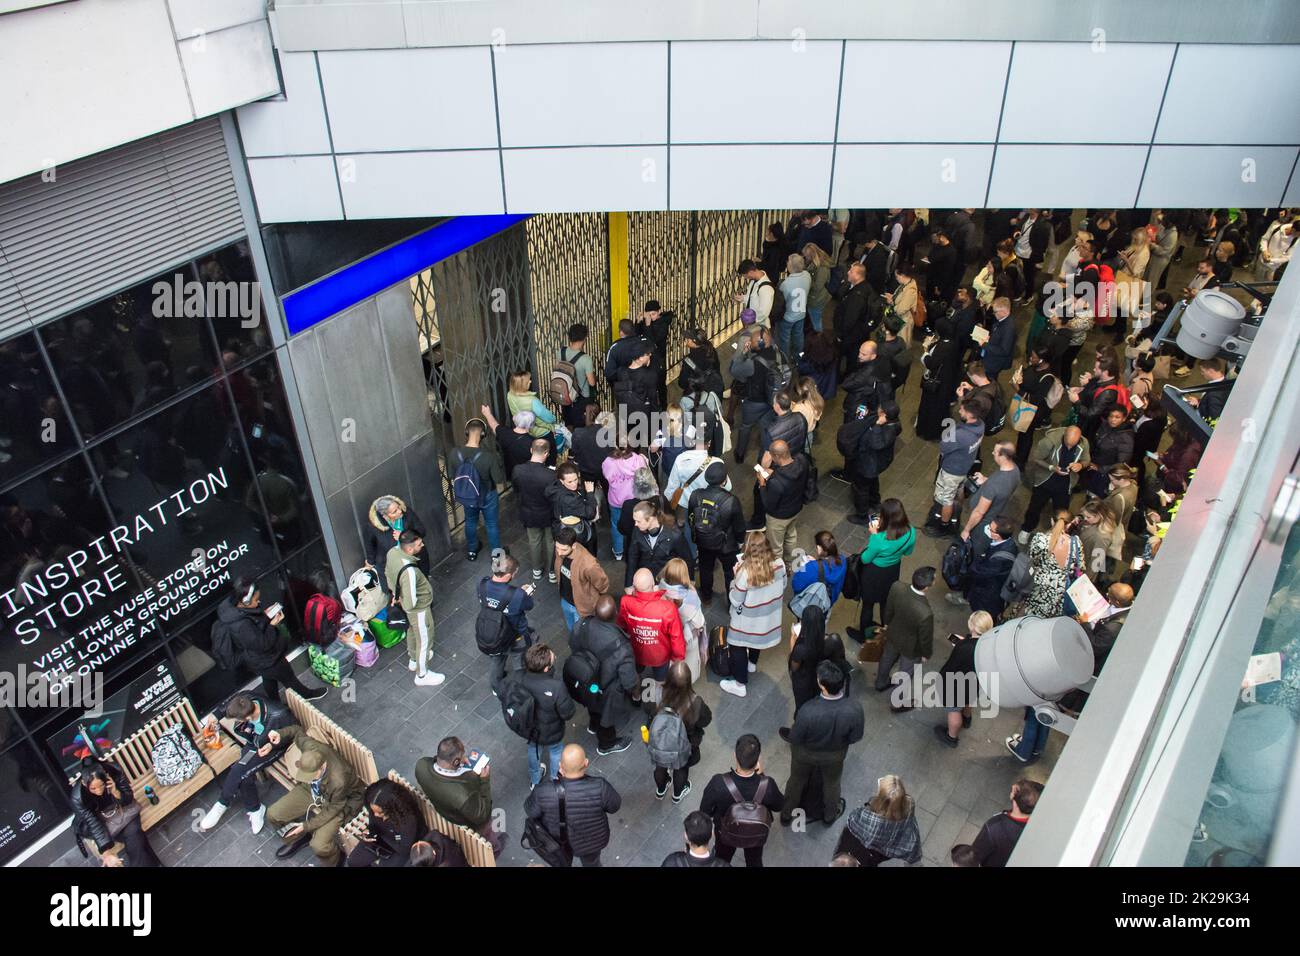 Stratford station, London, UK. 22 September 2022: Hundreds of commuter waiting anxiously getting home at Stratford station shutdown cause of a Stairlifts broken down. Stock Photo